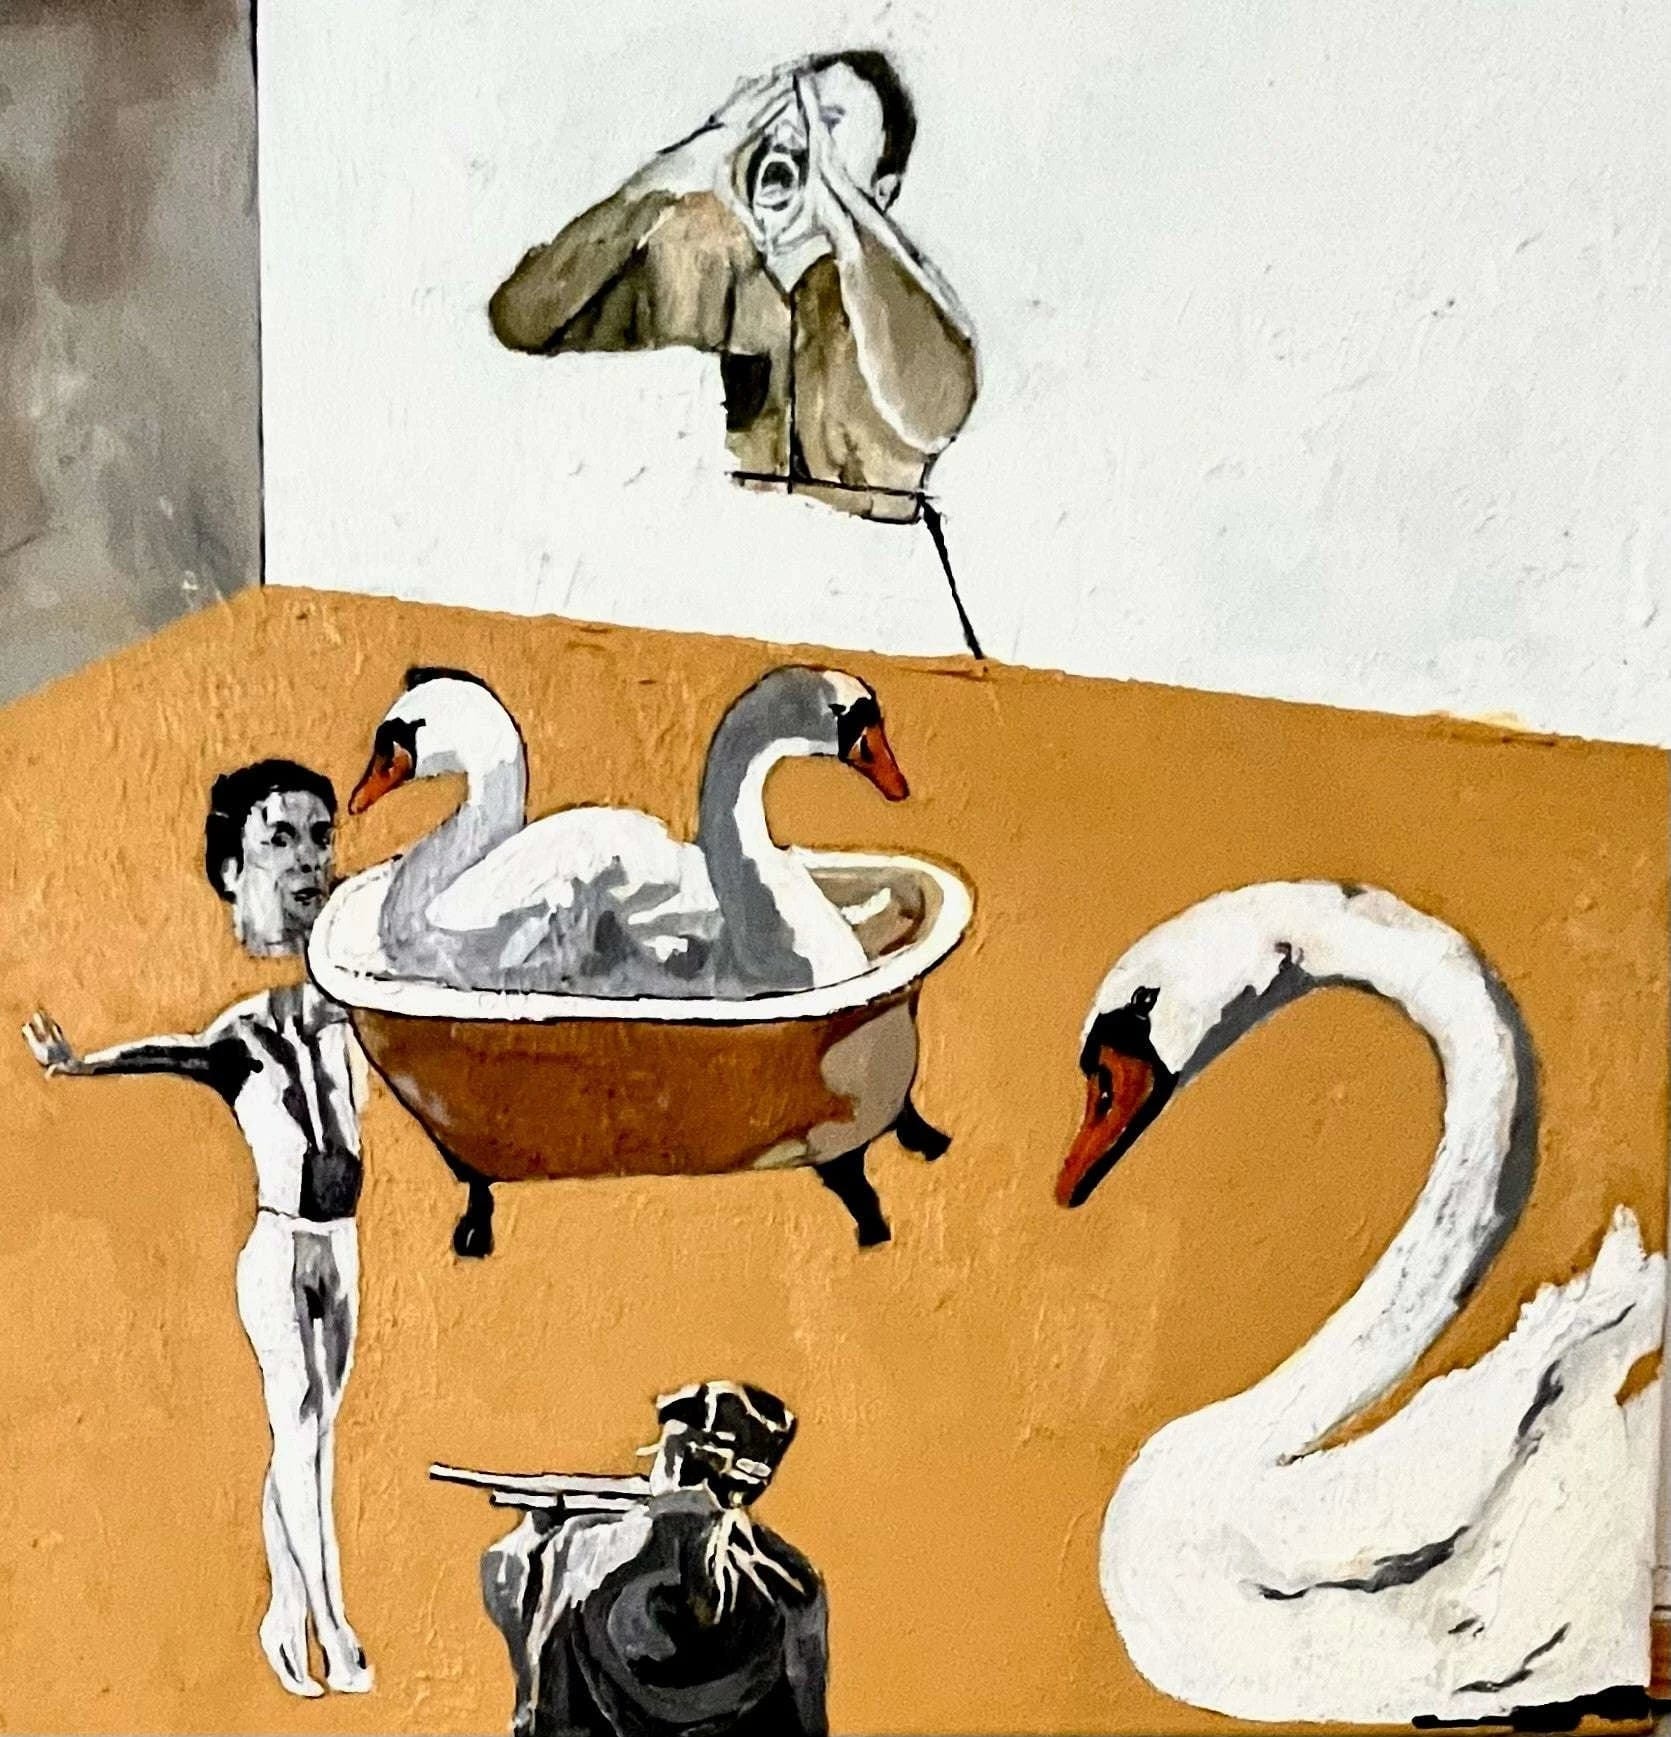 Margareta Gelles - If you damages a swan you have lost your light